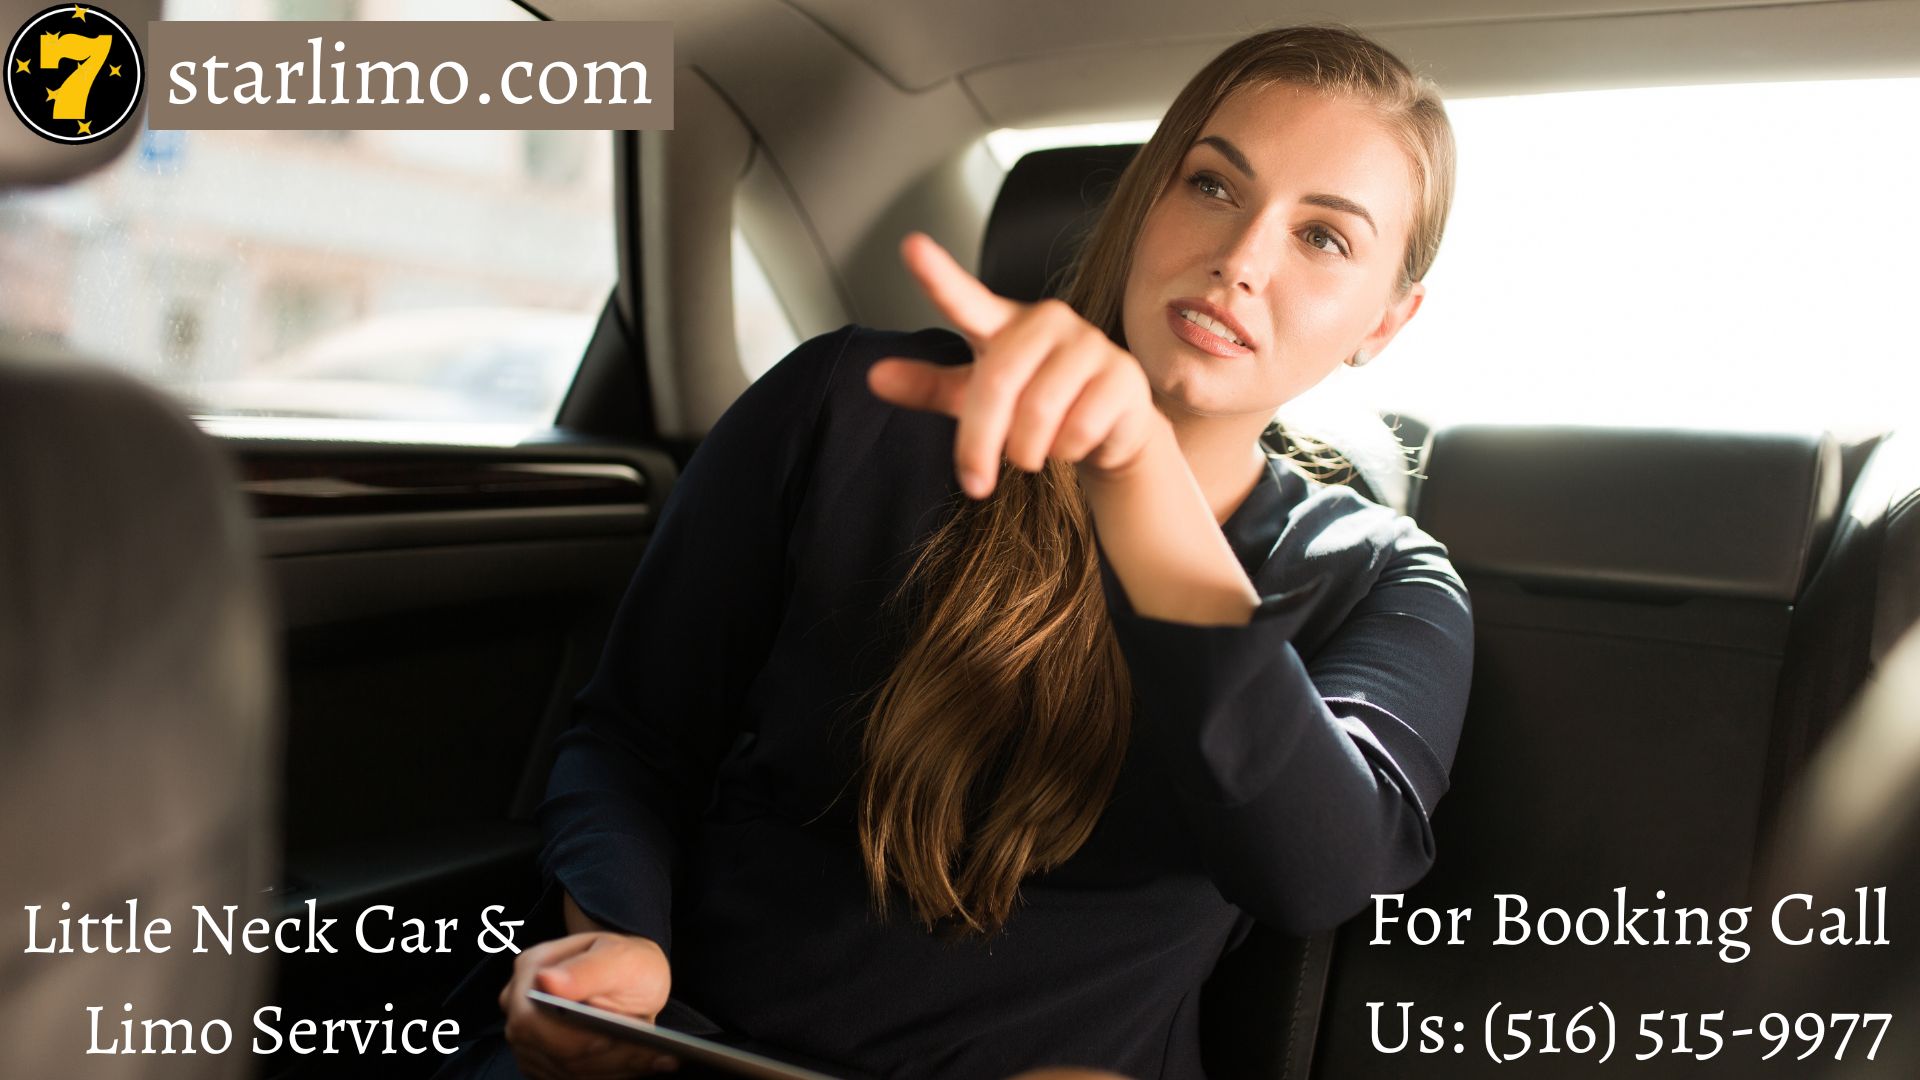 Limo Service in Little Neck NY